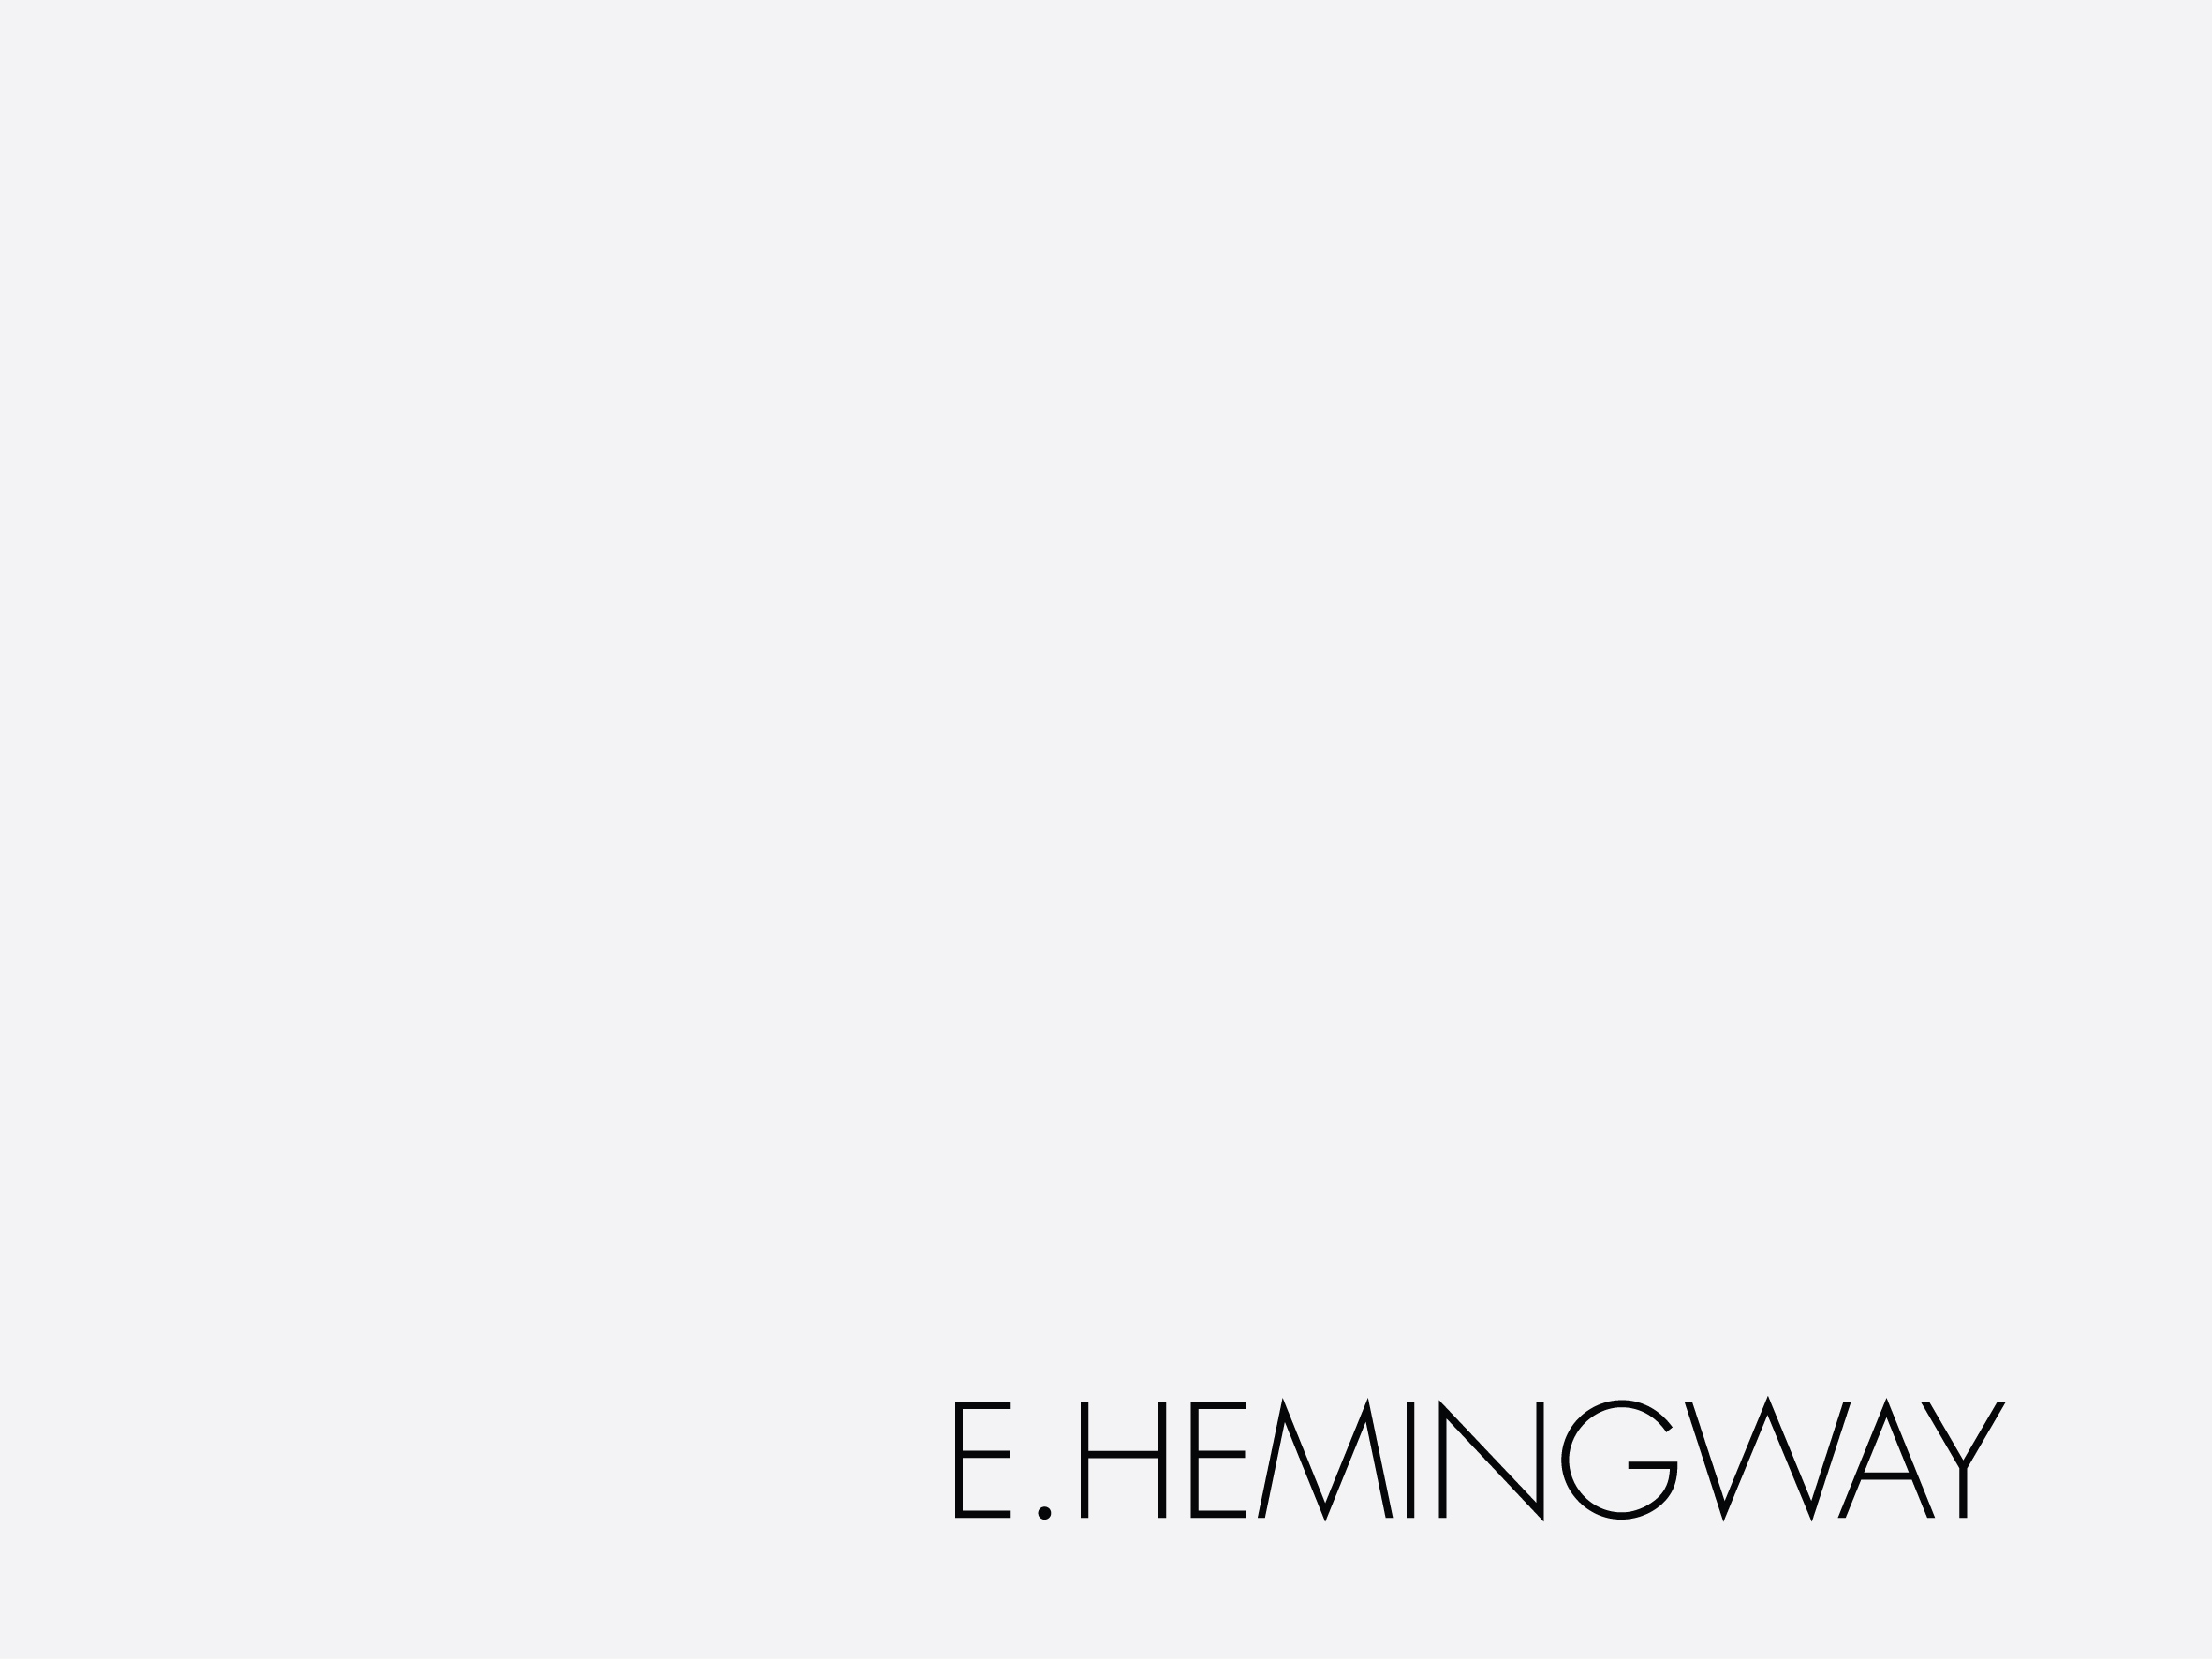   E.HEMINGWAY  is a lifestyle fashion brand.  It can be a very exclusive club, or a boutique hotel chain.  The concept can exist in the Caribbean, the French Riviera, the Greek Islands, or Polynesia.  E.HEMINGWAY is a trendy café, a bar, a restaurant